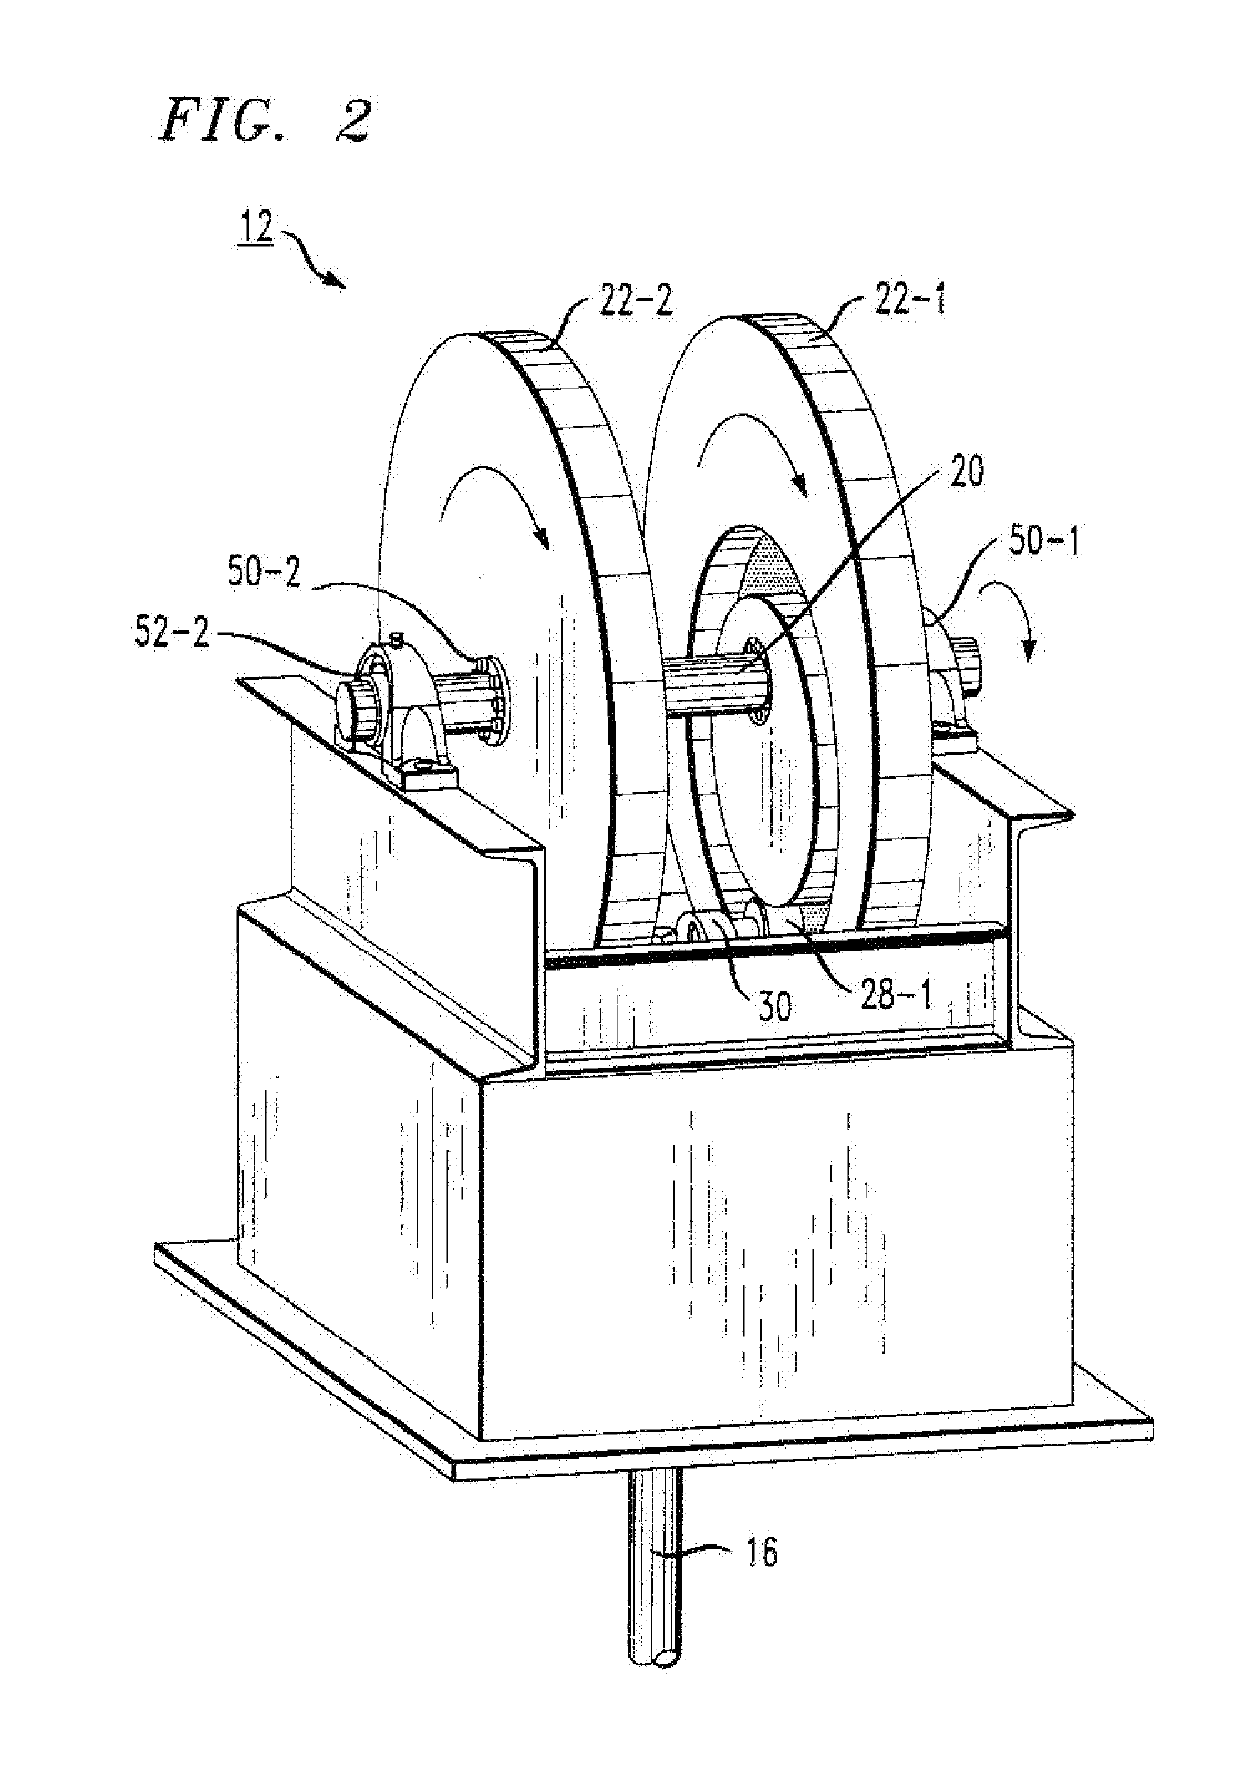 Apparatus for Converting Rotation Motion to Linear Reciprocating Motion